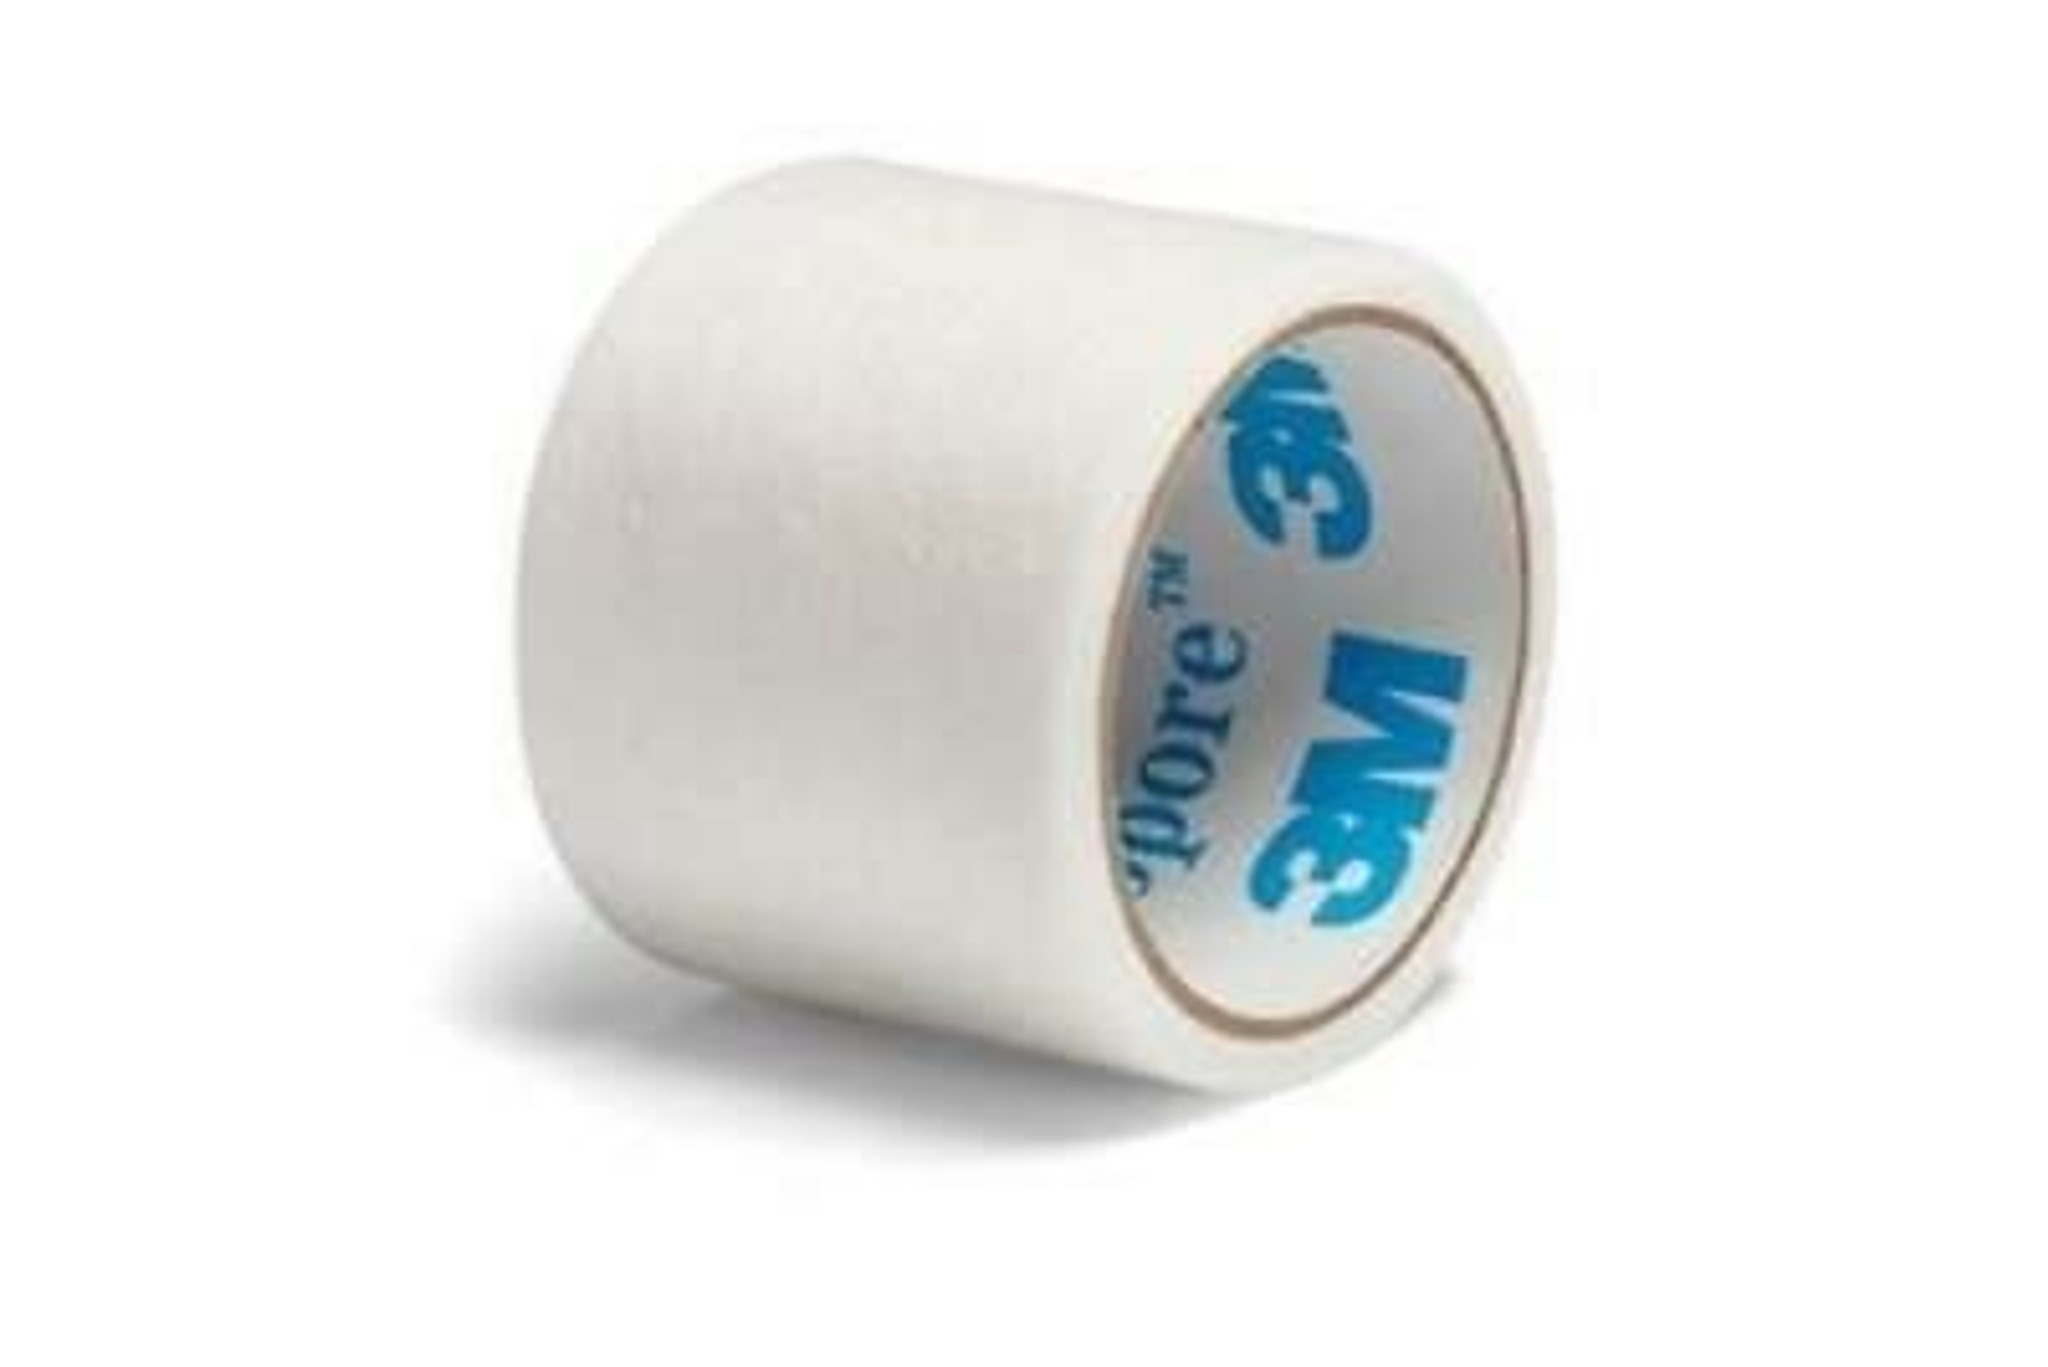 3M Micropore Medical Tape 1 Inch X 1-1/2 Yard - Box of 100